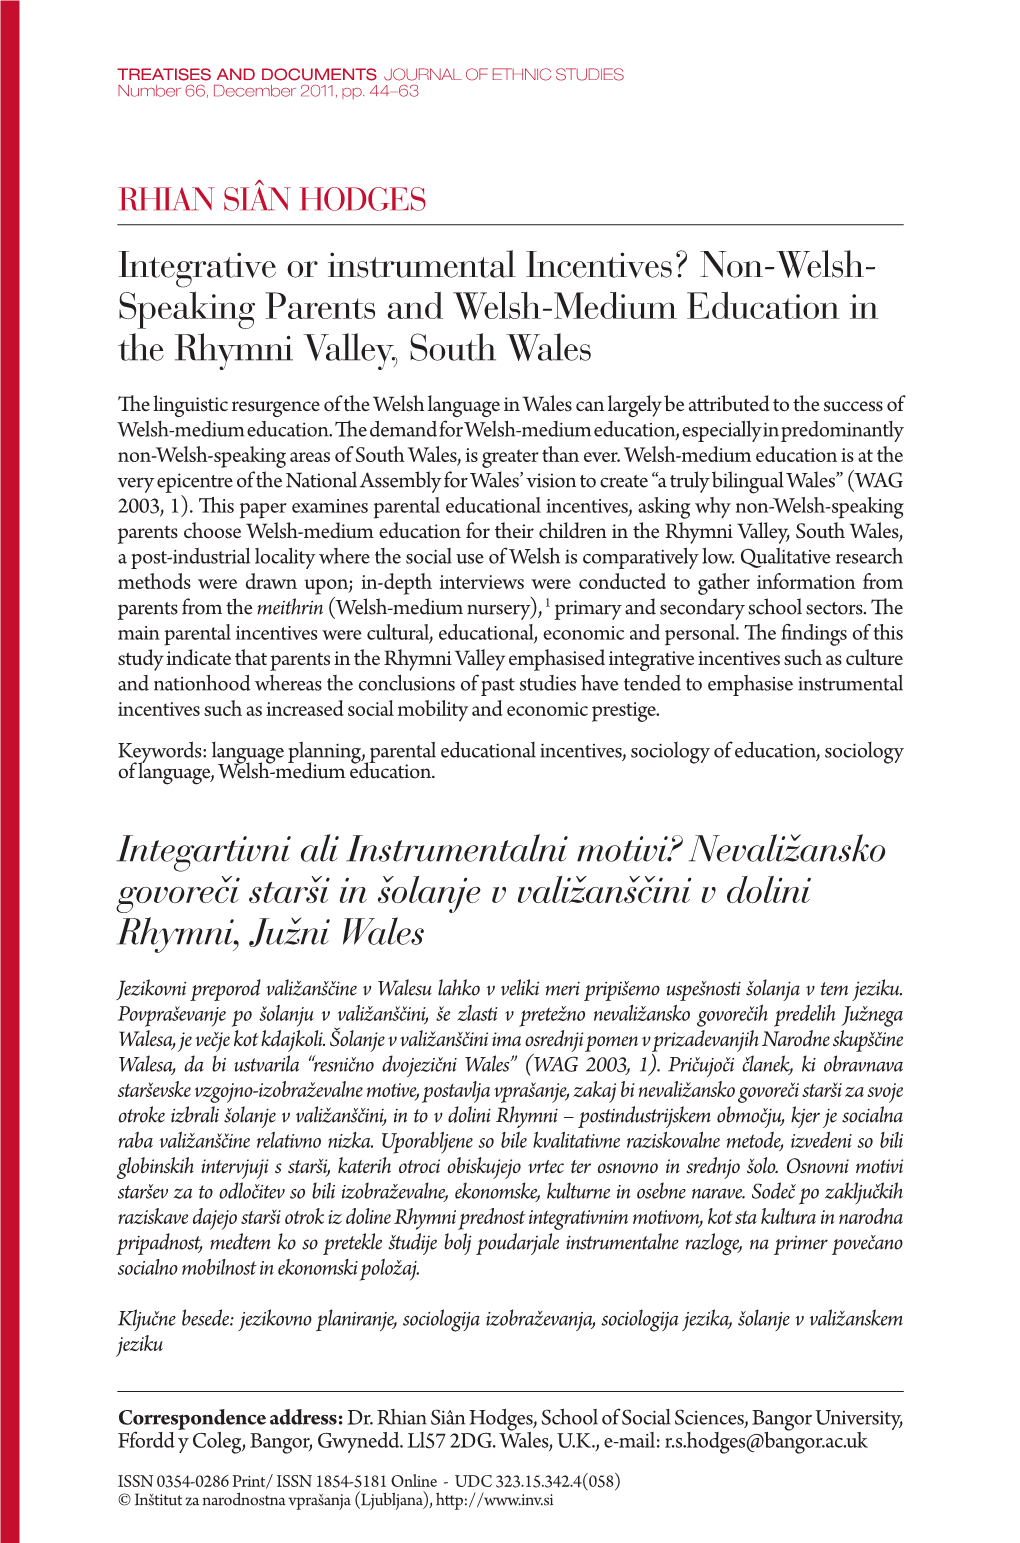 Speaking Parents and Welsh-Medium Education in the Rhymni Valley, South Wales